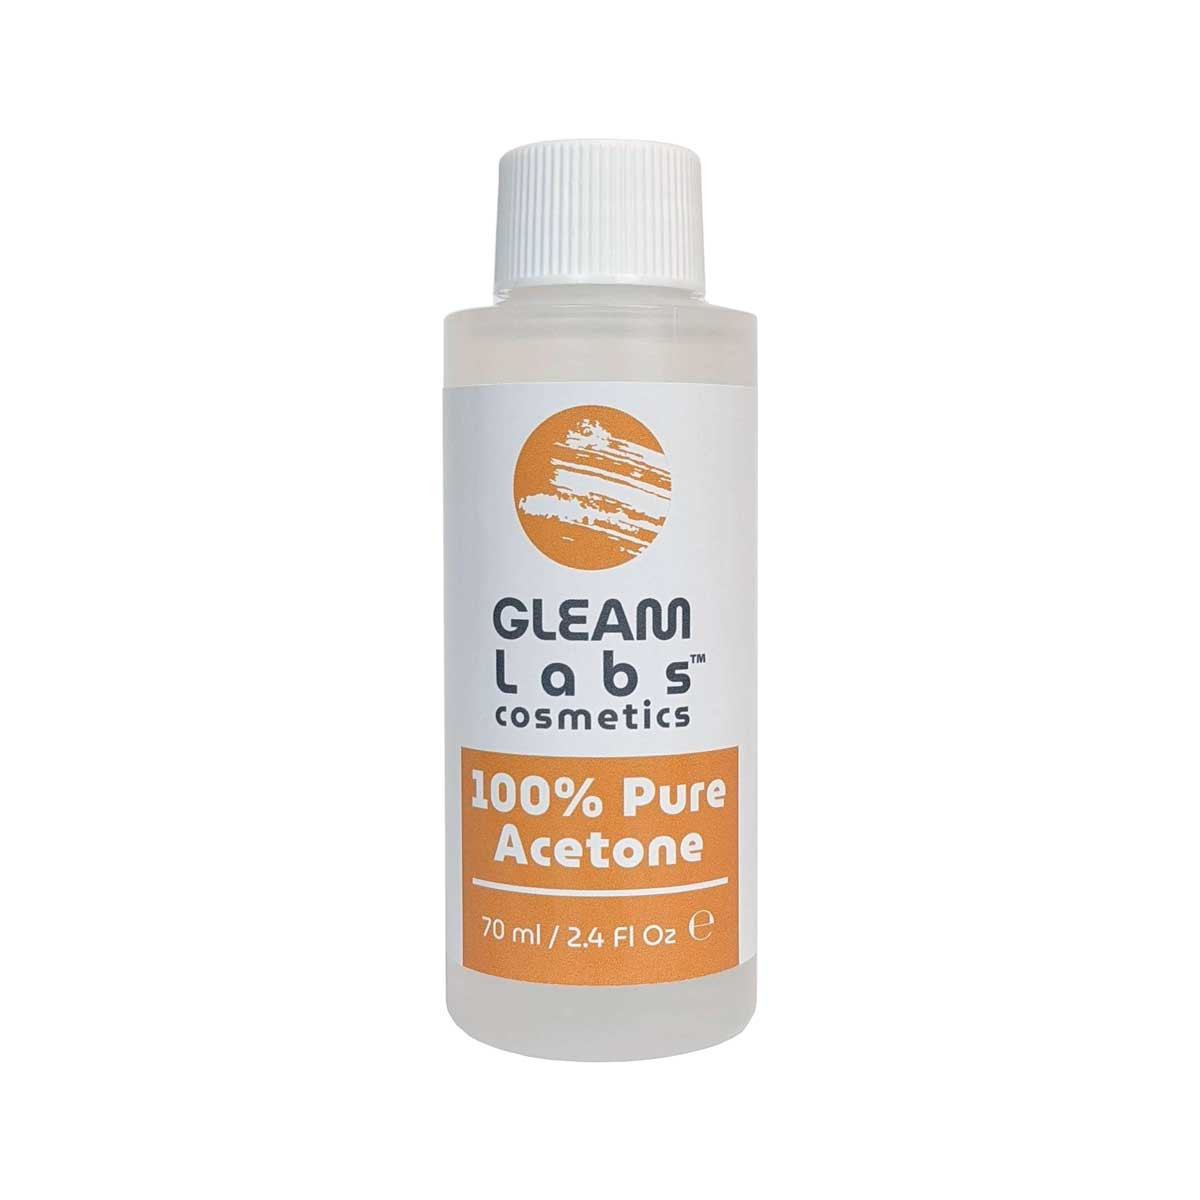 100% Pure Acetone 2.4 Fl Oz by Gleam Labs at